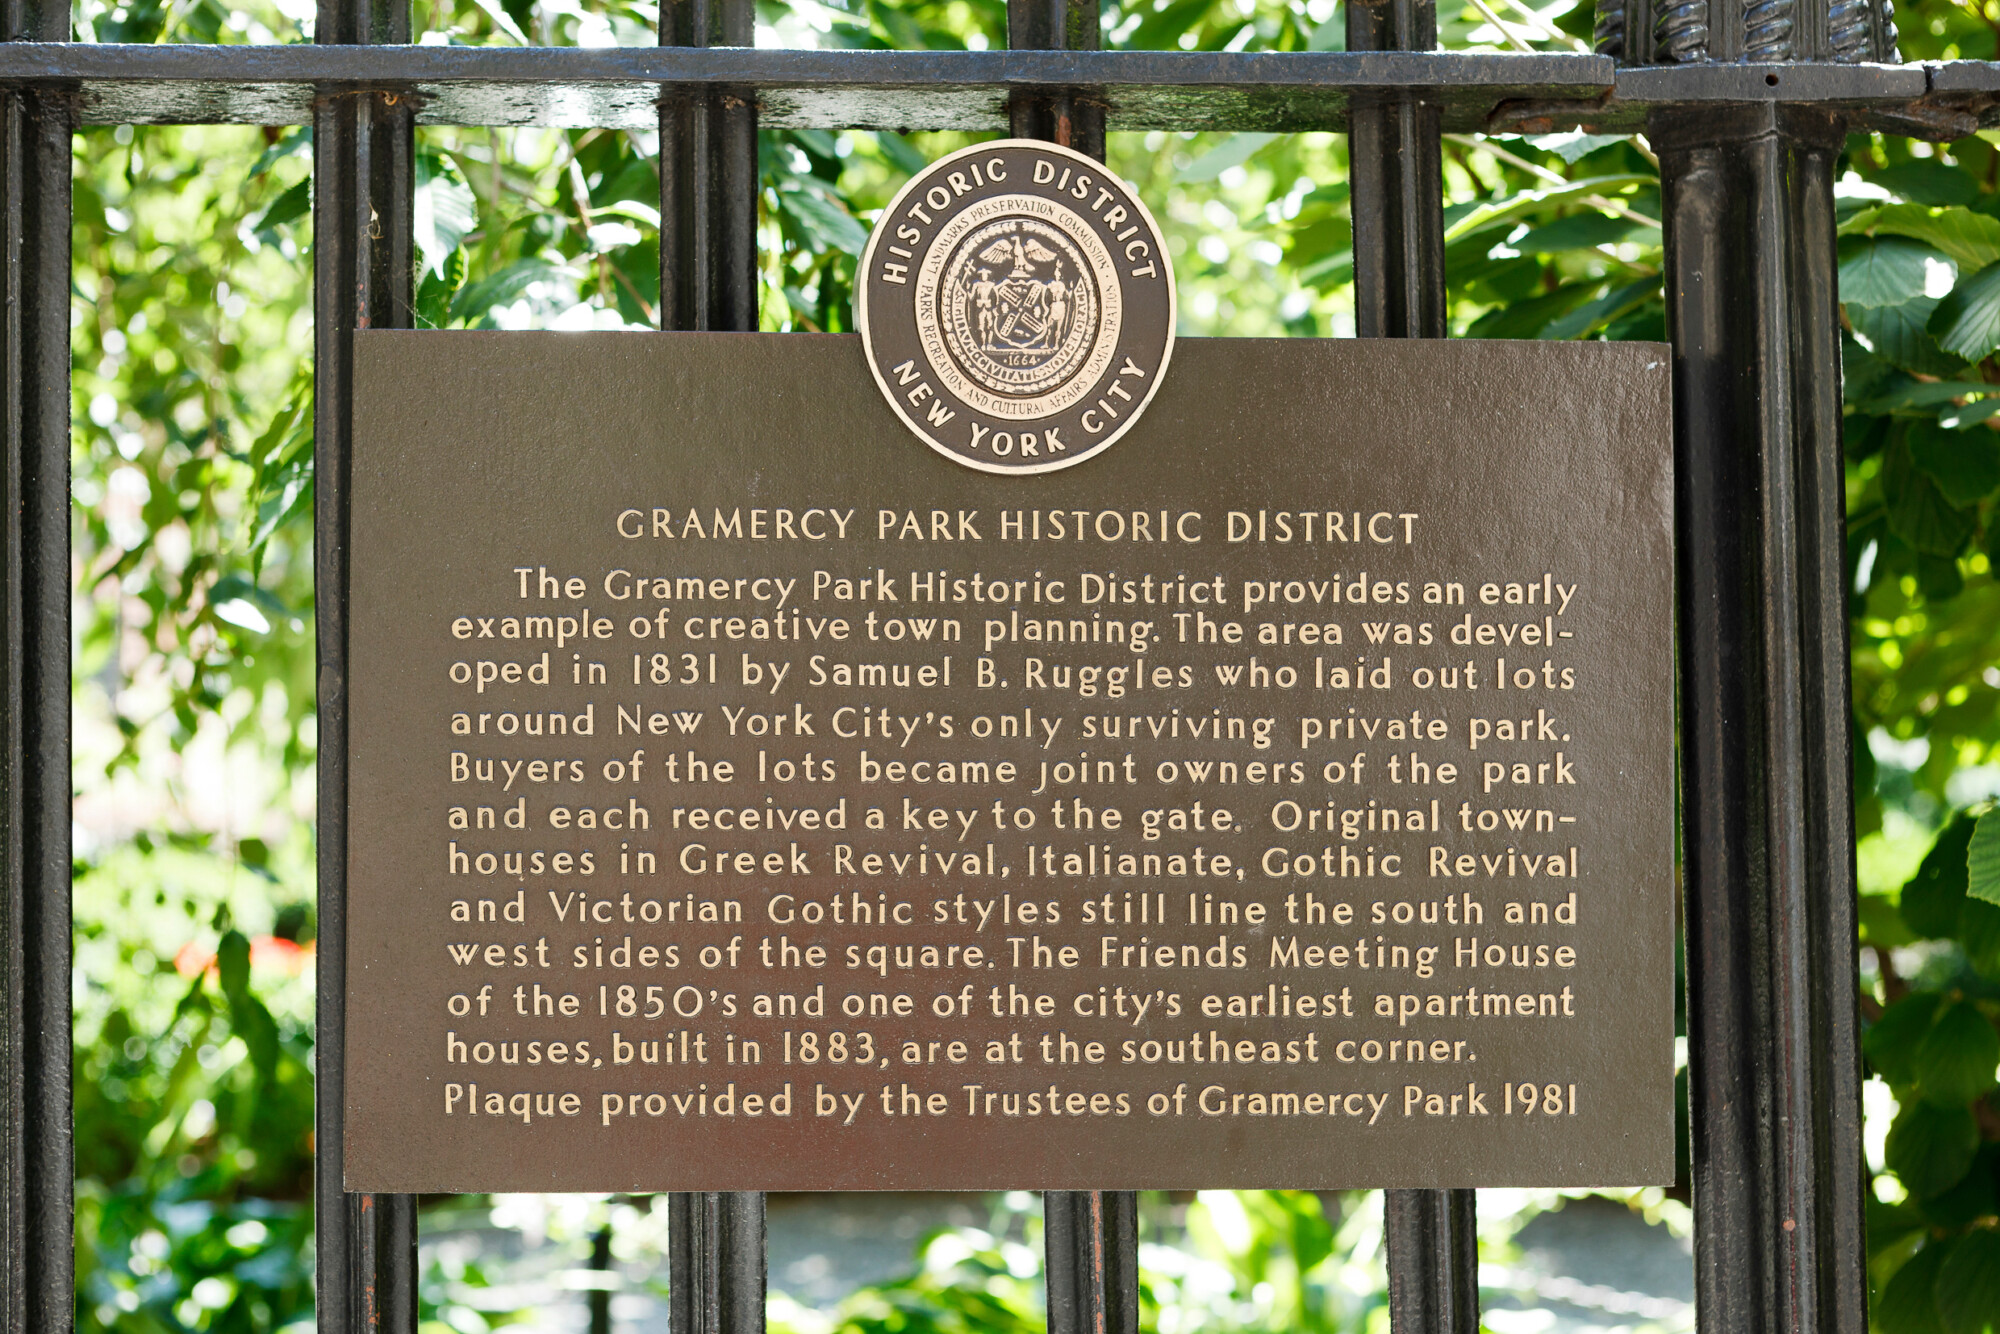 New York, New York, Usa July 14, 2011: This Is A Plaque On The Fence Of Gramercy Park (the Actual Park). It Describes The History Of This Park And Surrounding Historic District In Manhattan.